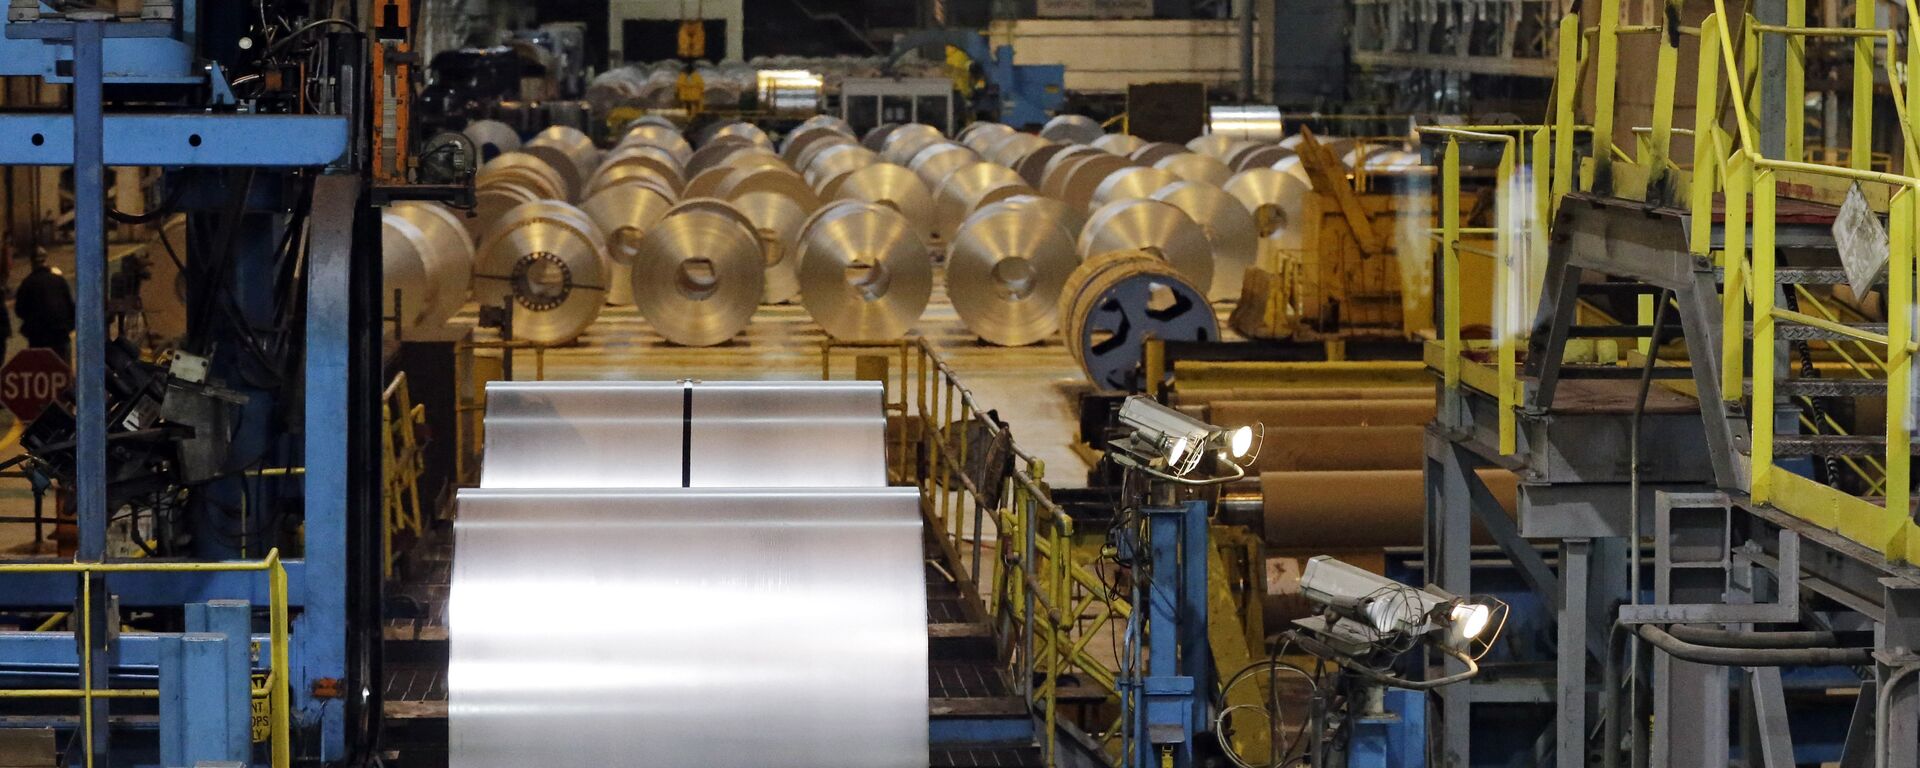 Finished galvanized steel coils await roll of the hot dip galvanizing line at ArcelorMittal Steel in Cuyahoga Heights, Ohio Friday, Feb. 15, 2013 - Sputnik International, 1920, 22.05.2018